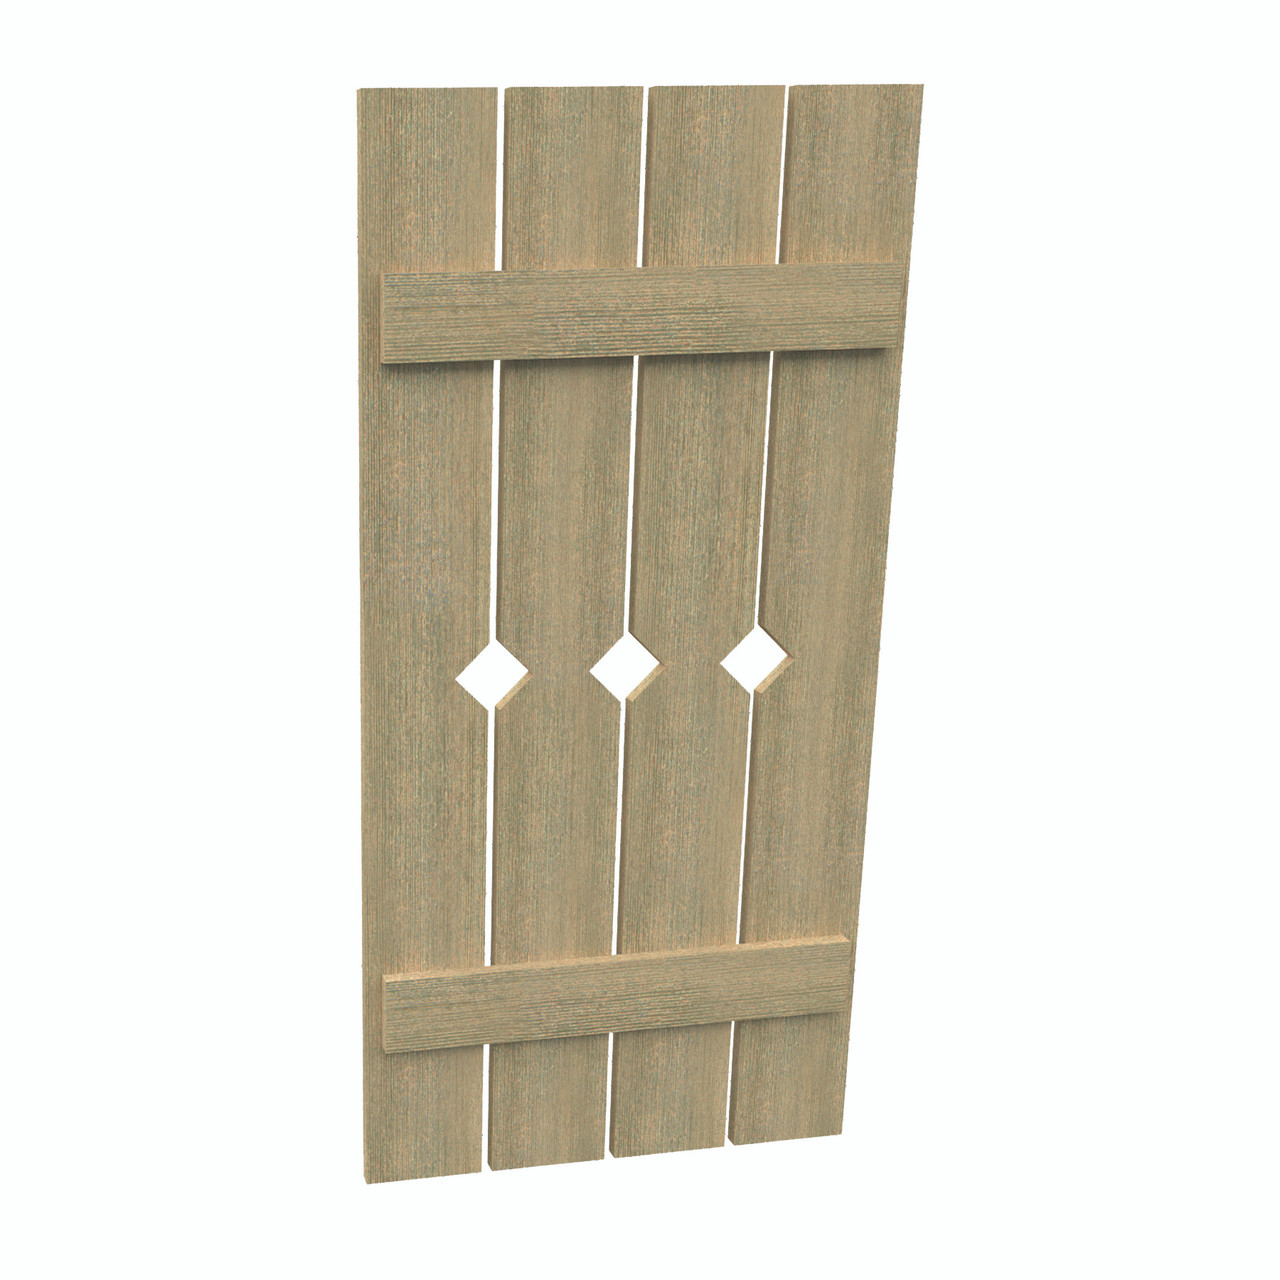 24 inch by 73 inch Plank Shutter with 4-Plank, Diamond